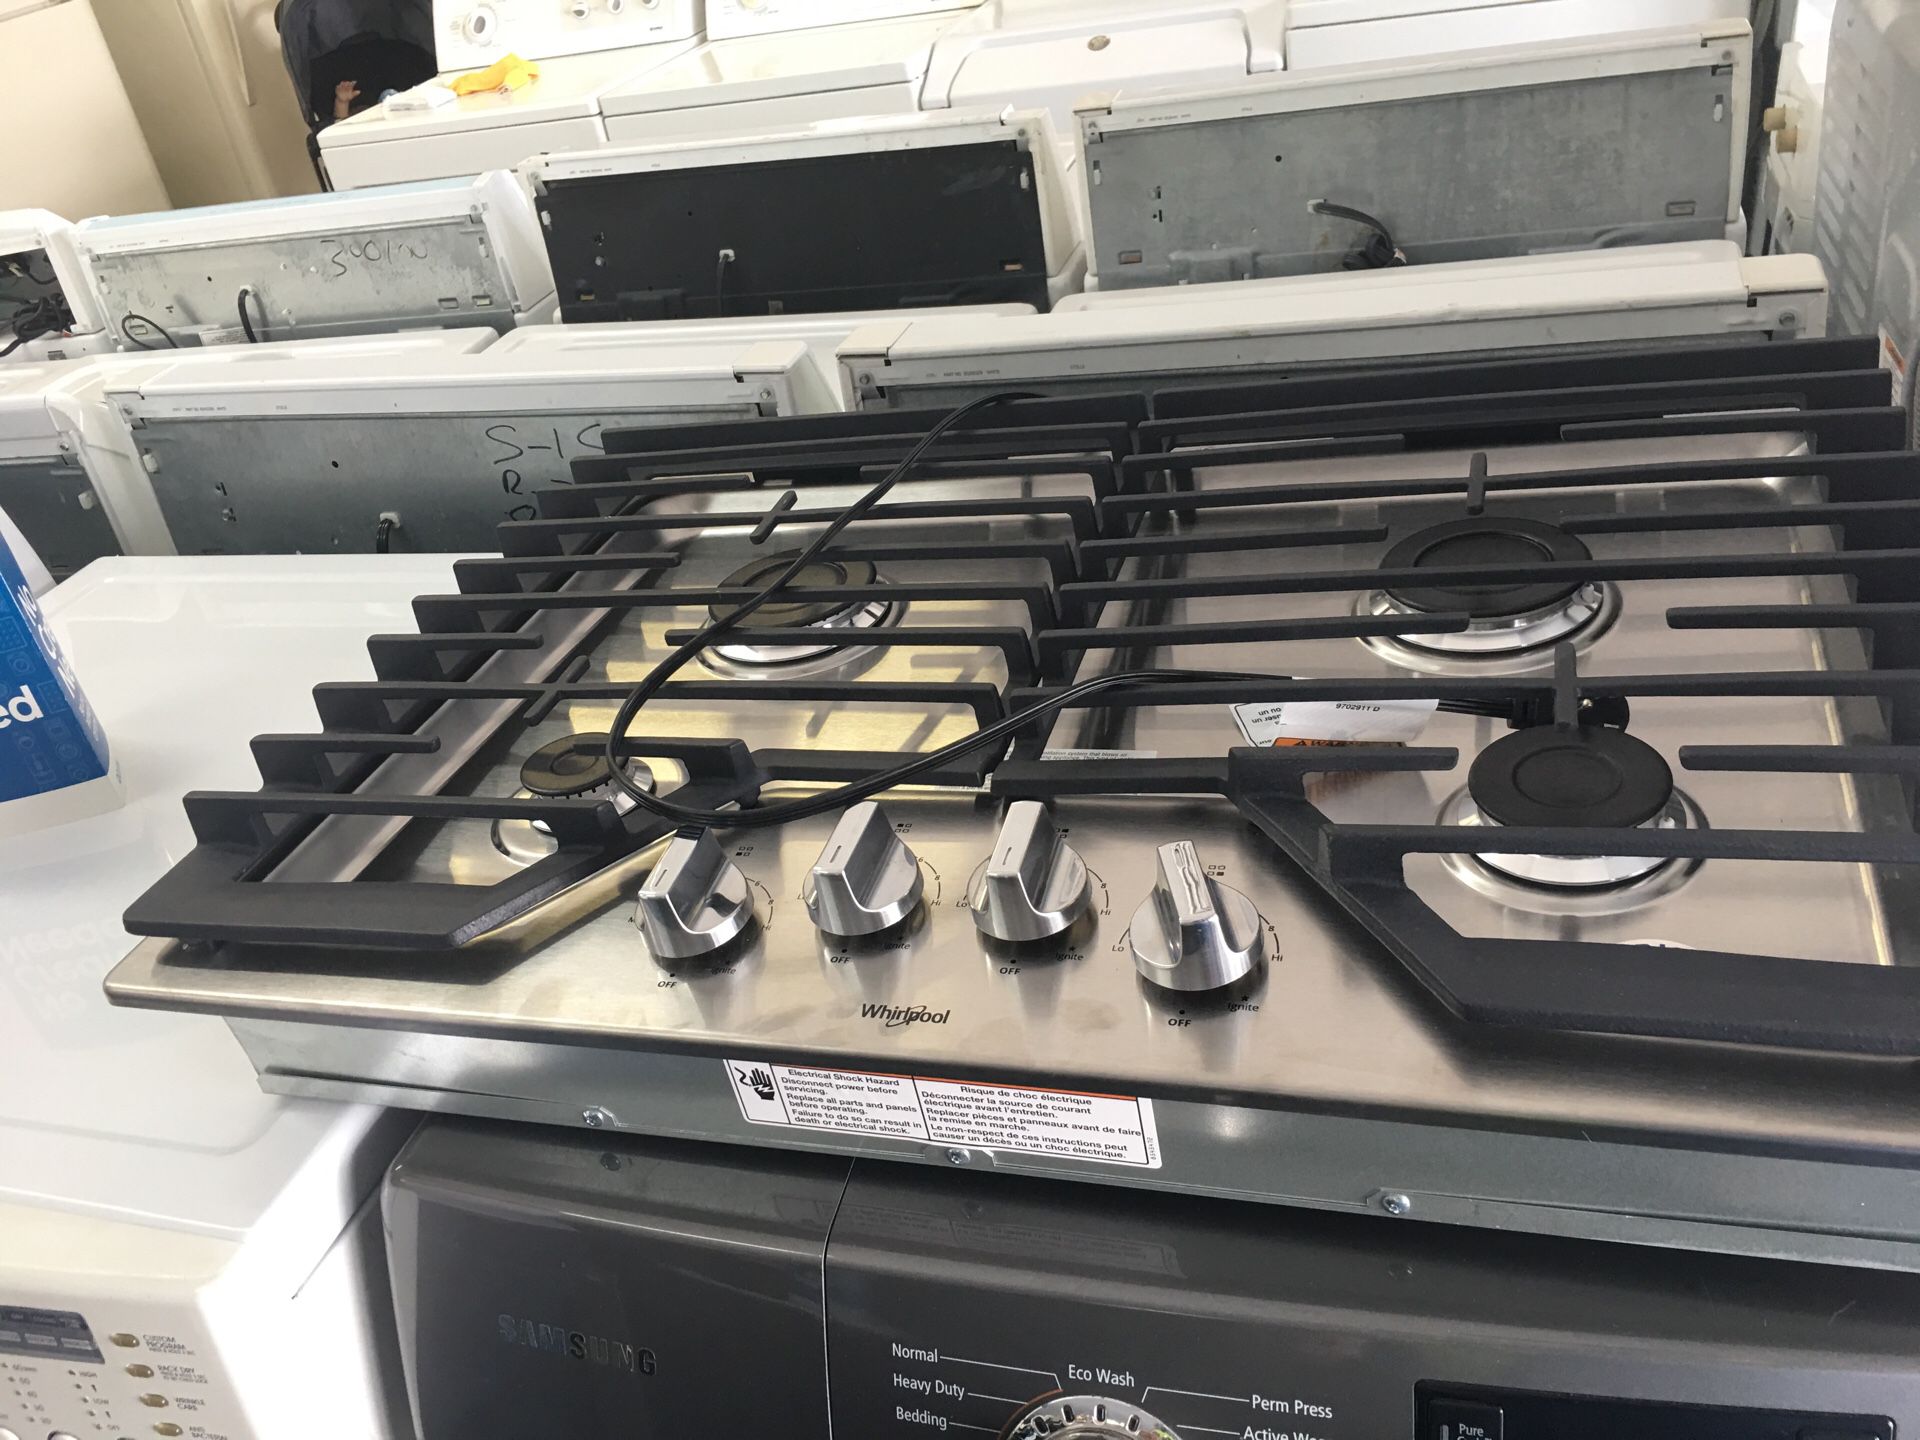 Whirlpool gas stove counter new-30 days warranty